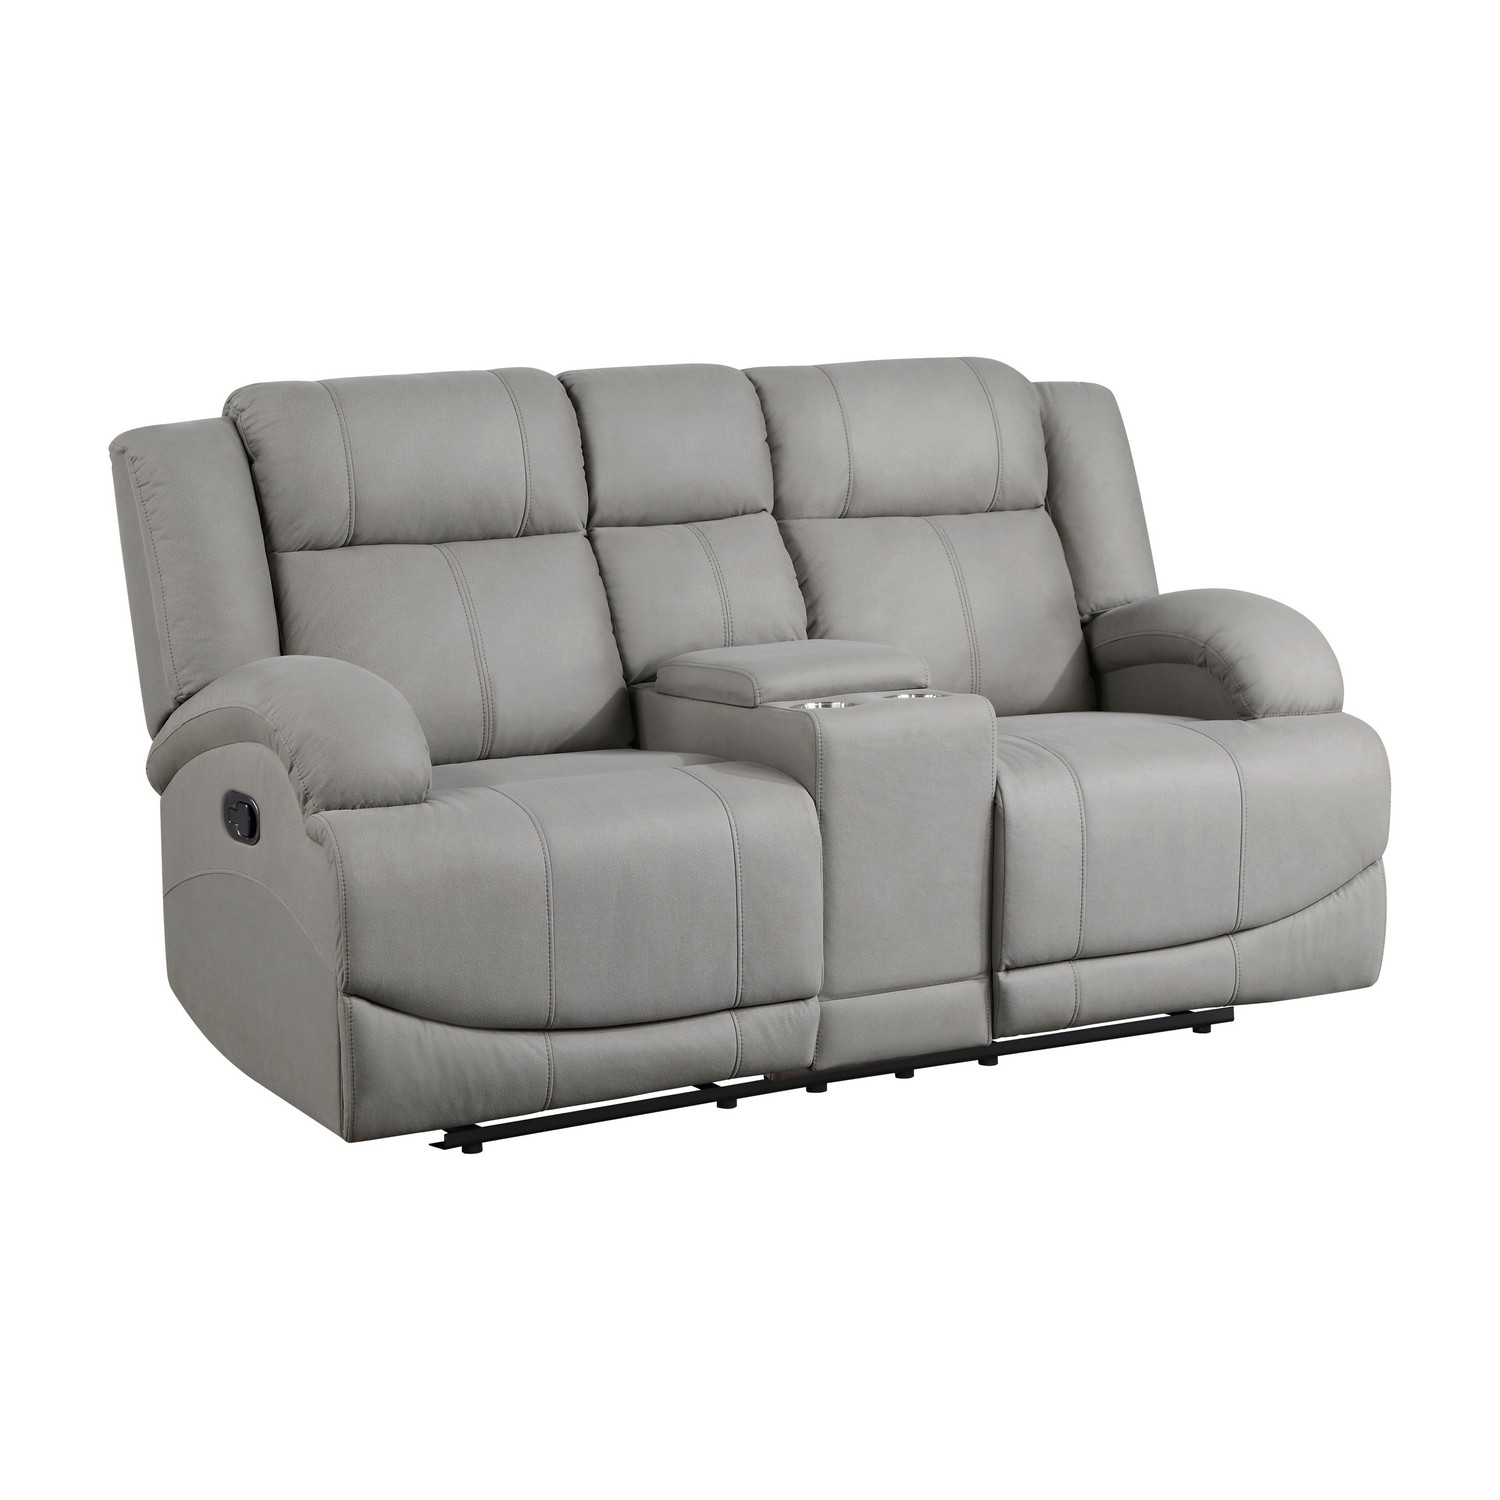 Homelegance Camryn Double Reclining Love Seat - Gray